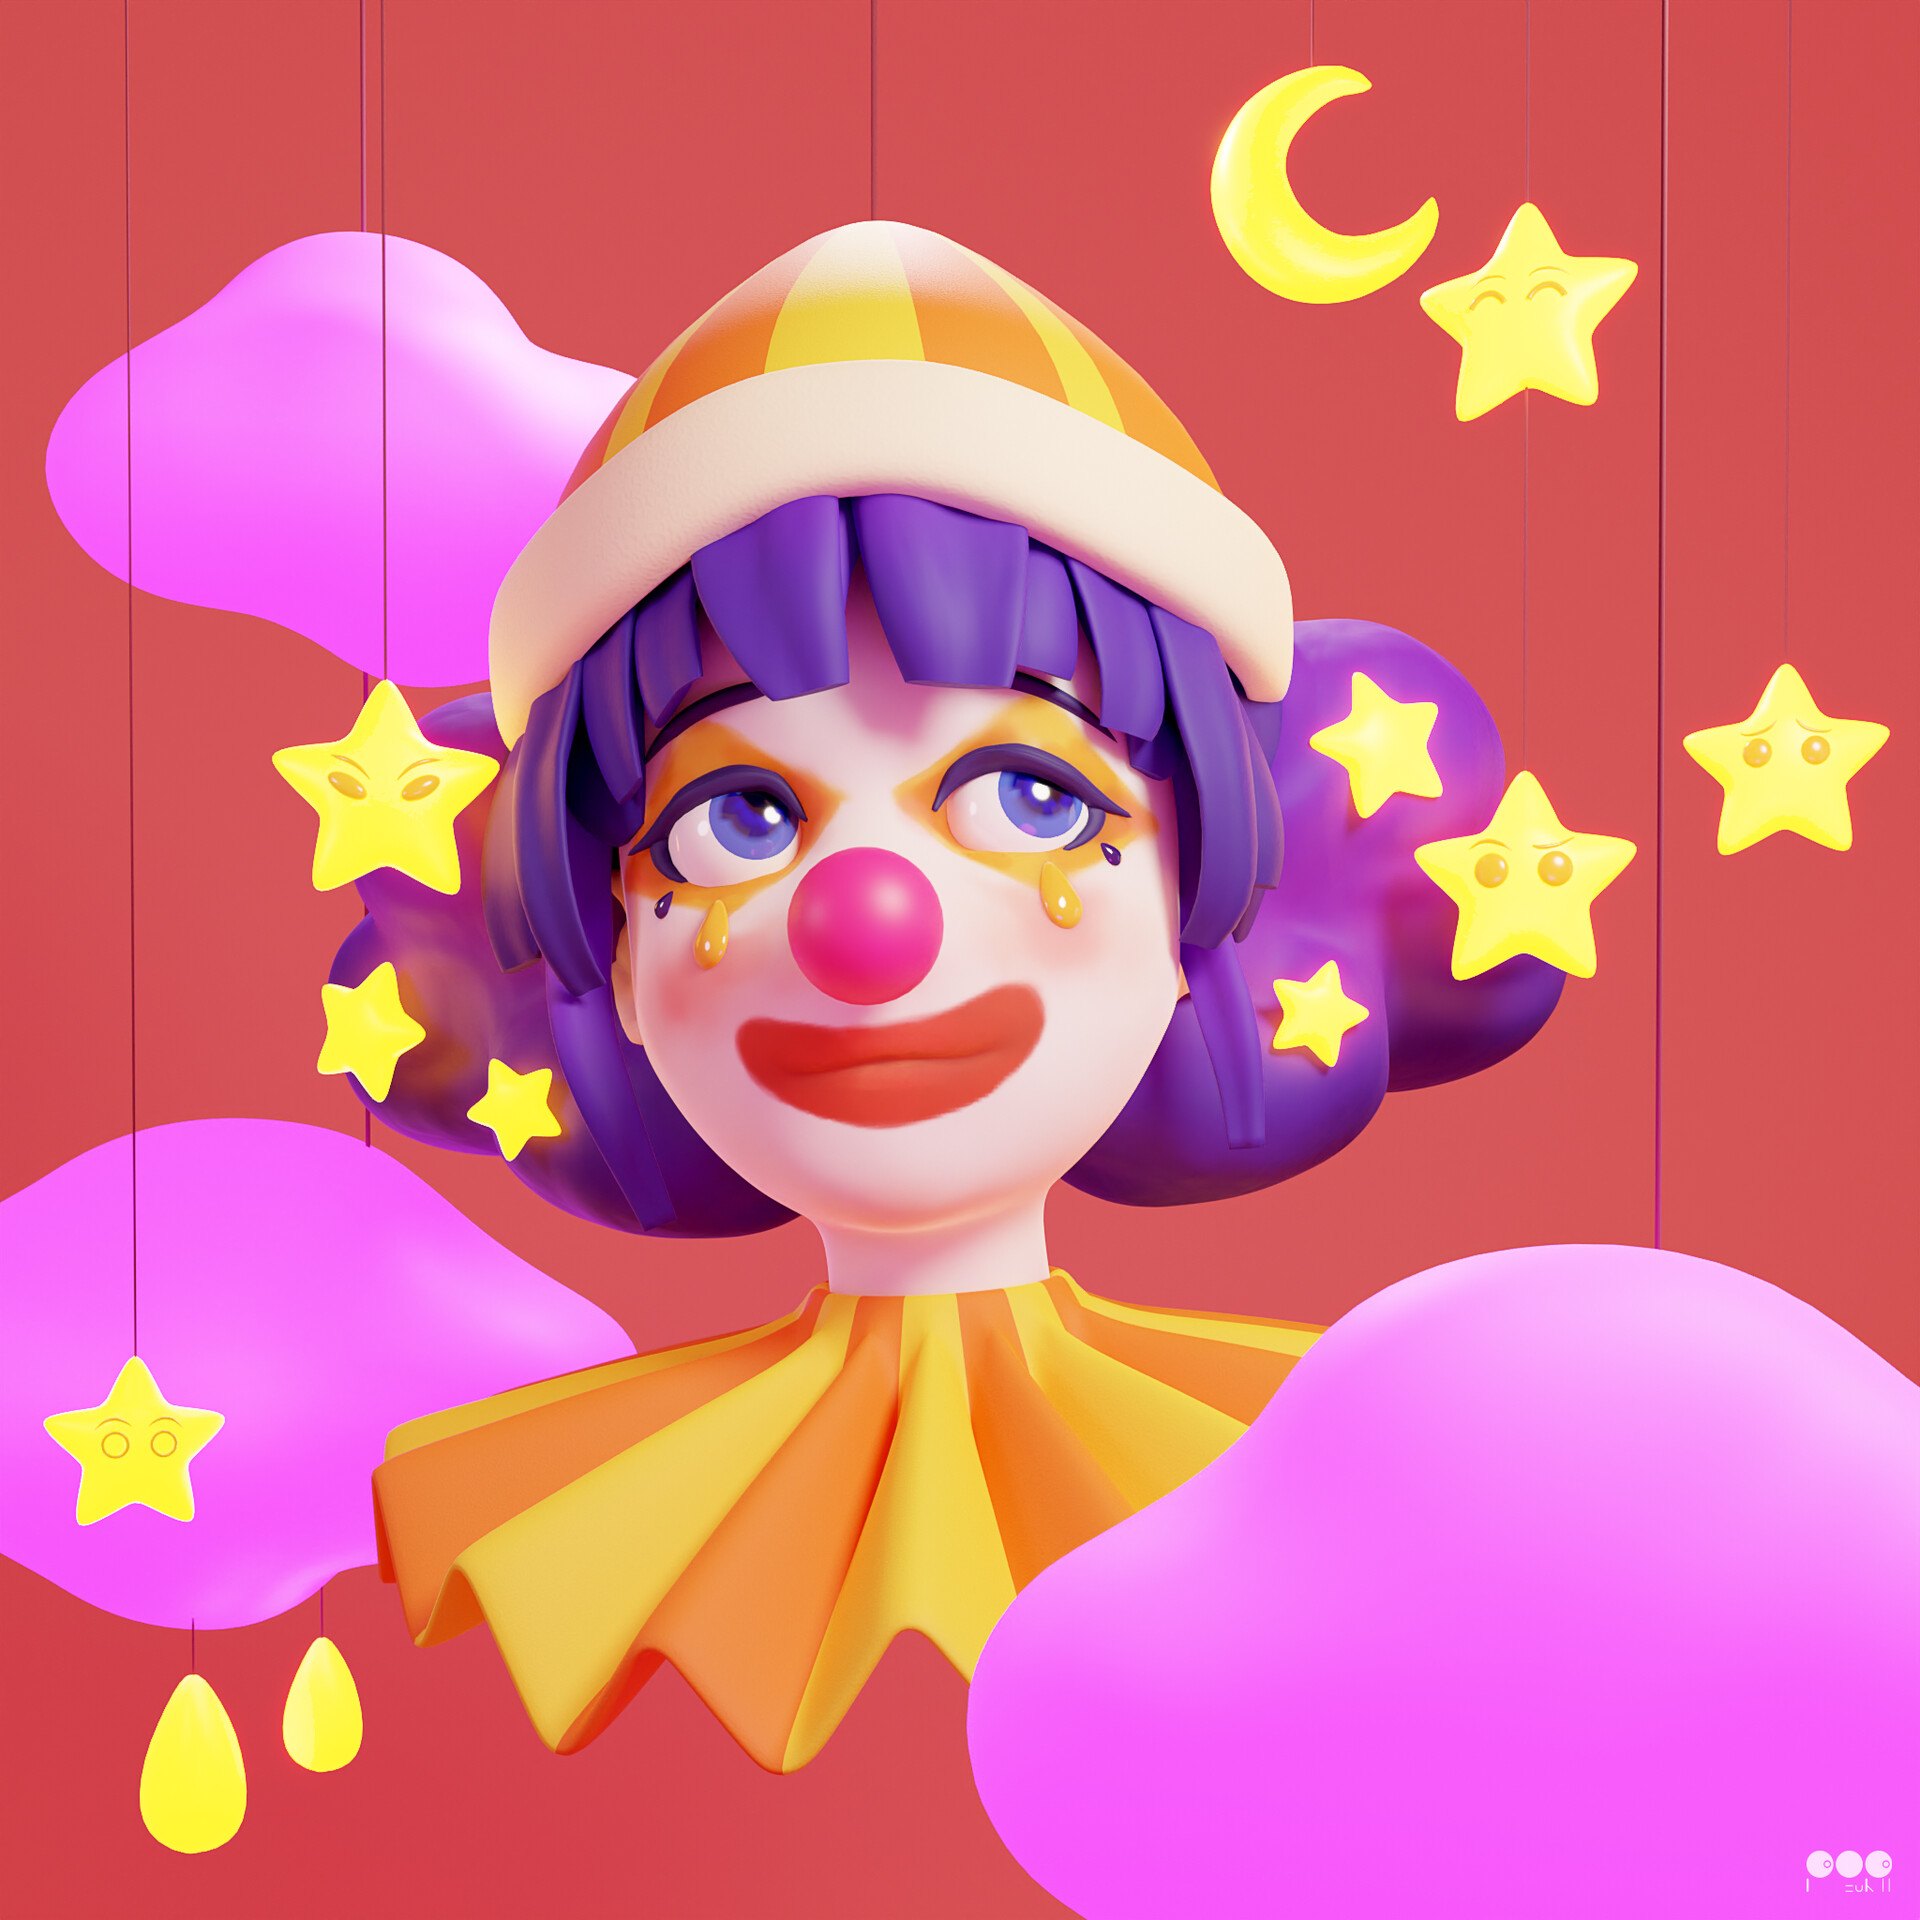 ArtStation - A Day with Clown Girl